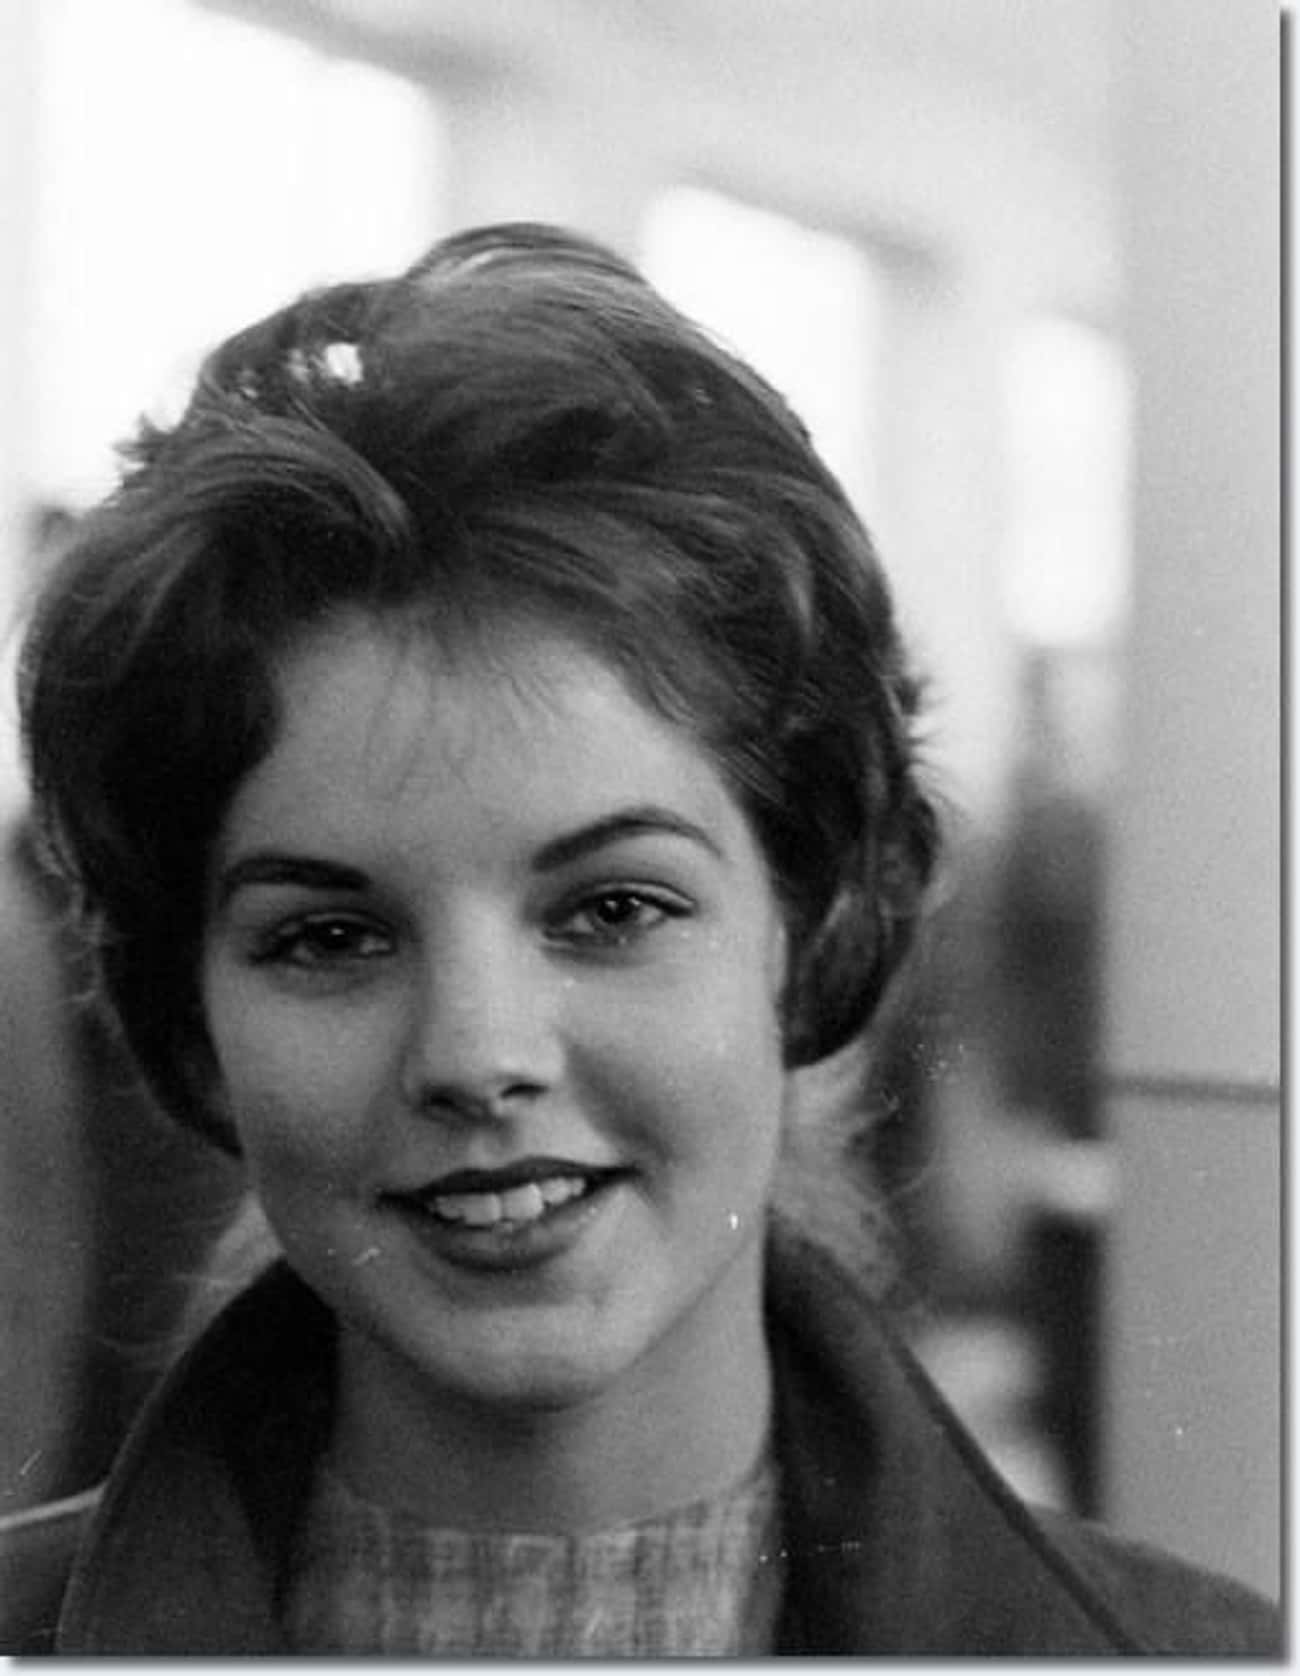 Young Priscilla Presley in a Turtleneck and Coat